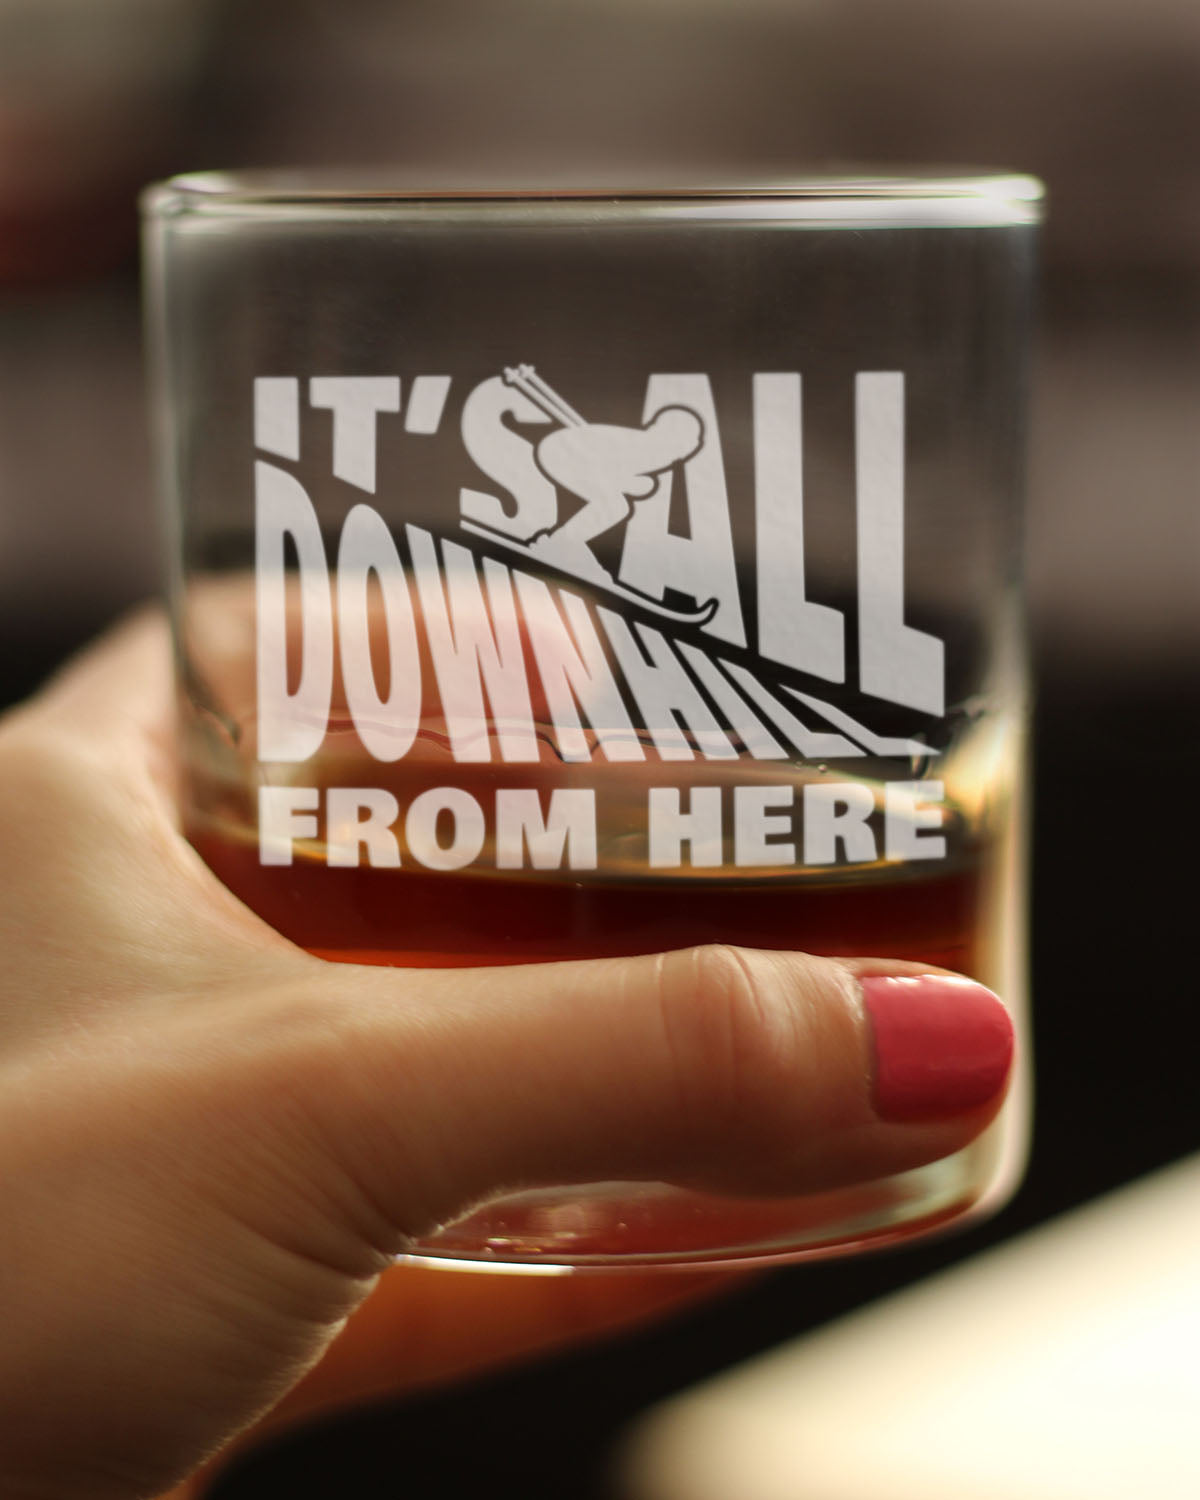 It&#39;s All Downhill From Here - Whiskey Rocks Glass - Unique Skiing Themed Decor and Gifts for Mountain Lovers - 10.25 Oz Glasses